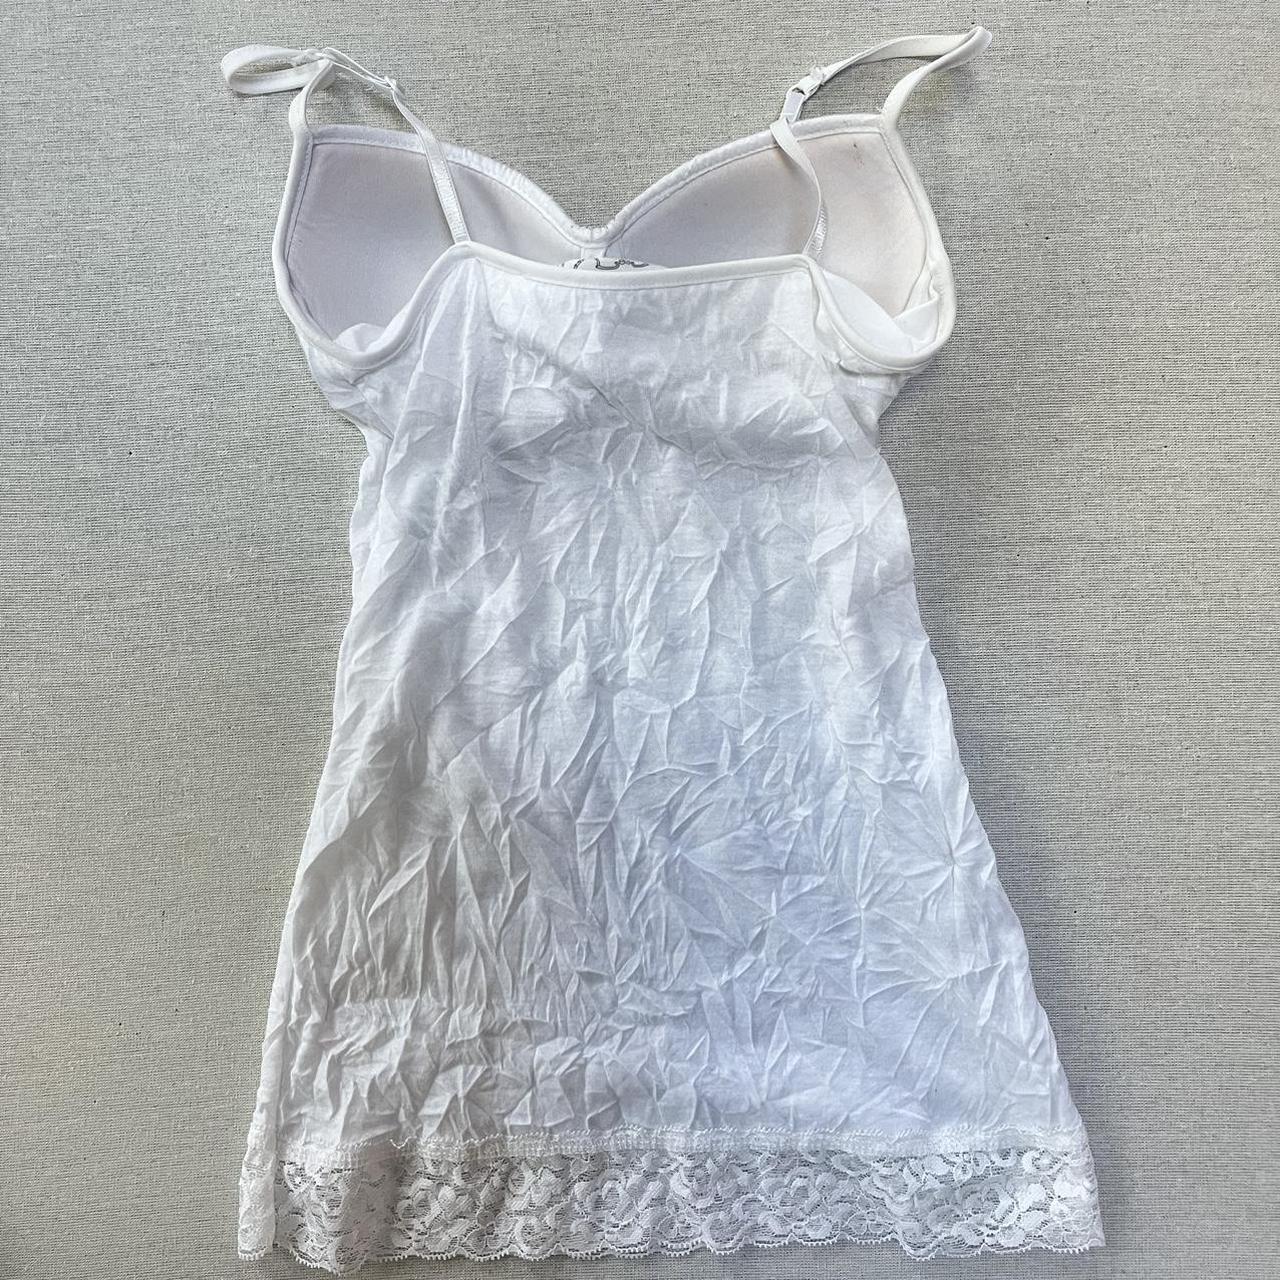 Lace cami! - best fits xs/small - built in bra - - Depop